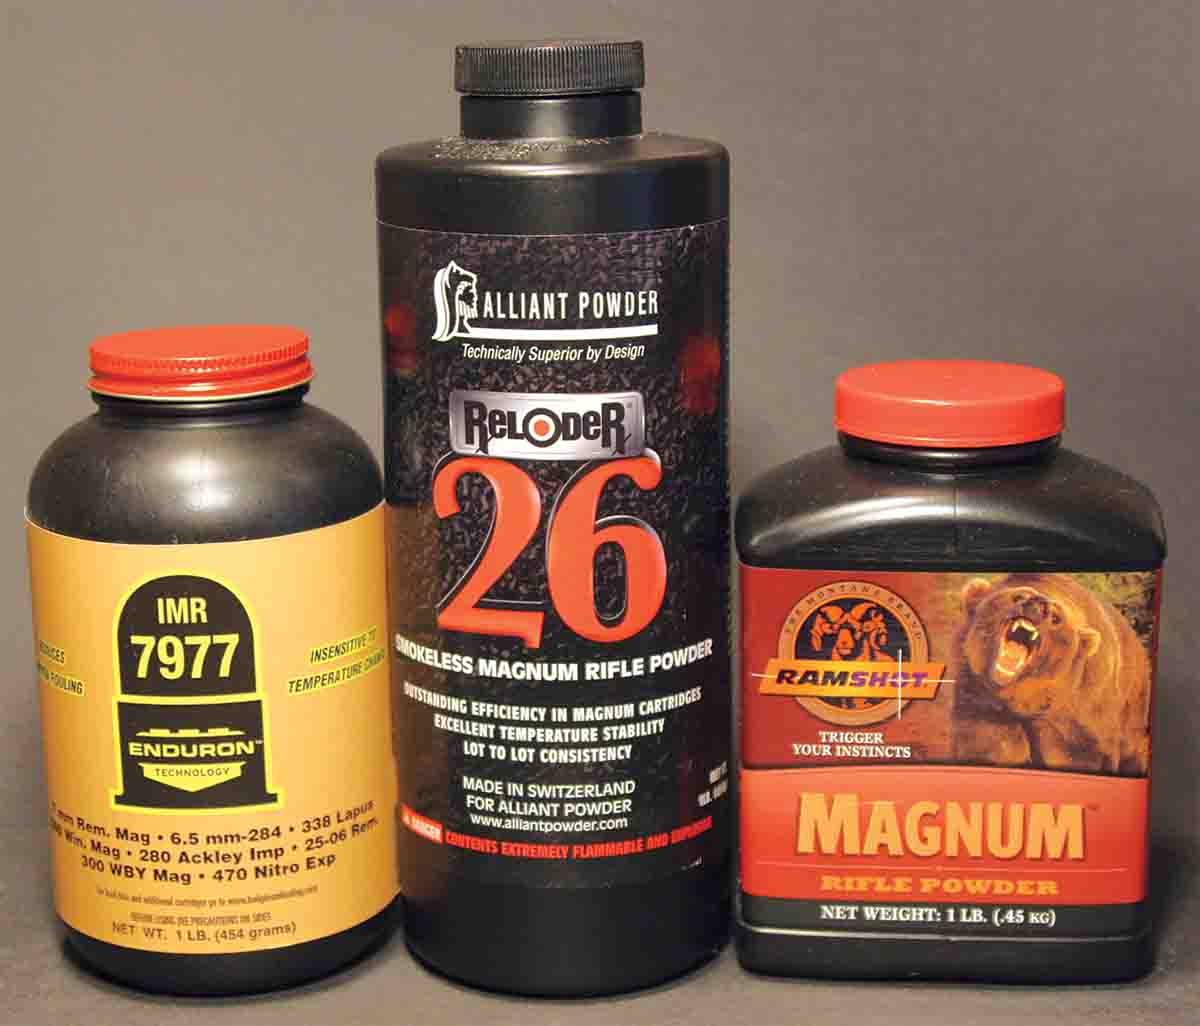 Today’s handloading powders can play a major role in reducing bore fouling. Some, like IMR Enduron and recent Alliant rifle powders like Reloder 26, contain decoppering agents. Newer spherical powders like the Ramshot line burn far cleaner than many older sphericals, reducing both powder and copper fouling.